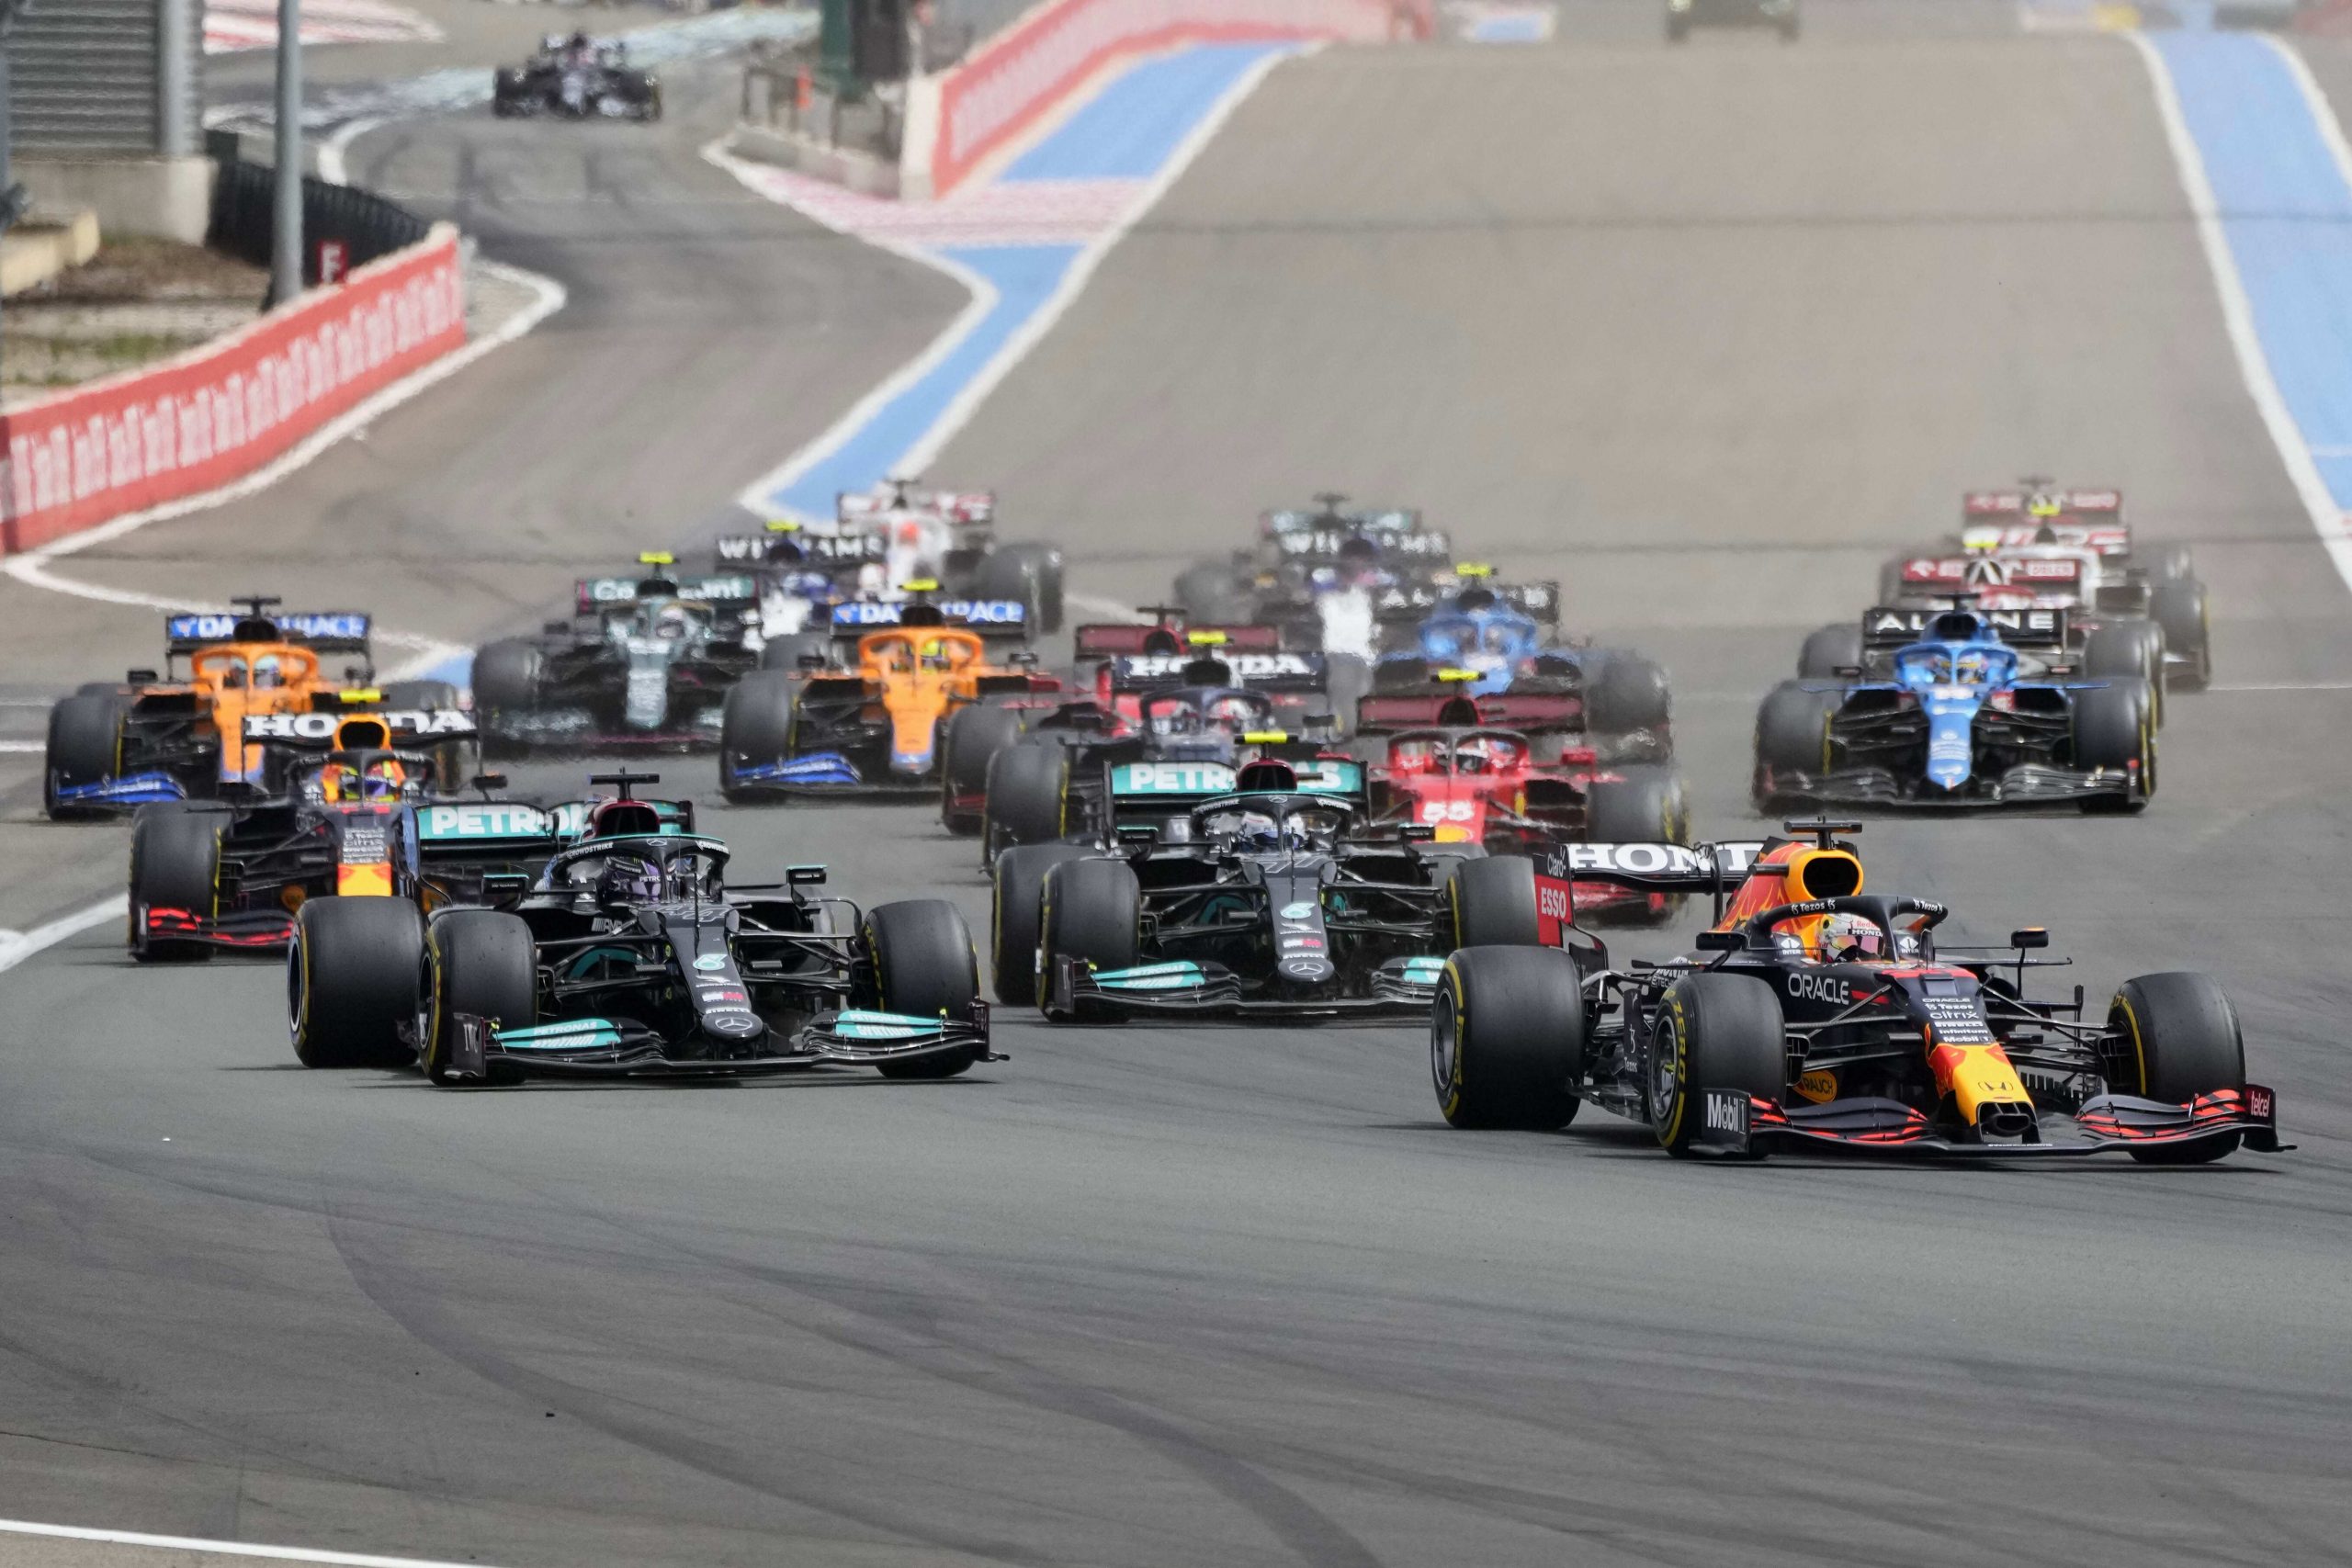 FIA issued new driving guidelines ahead of 2022 Formula 1 season: Report